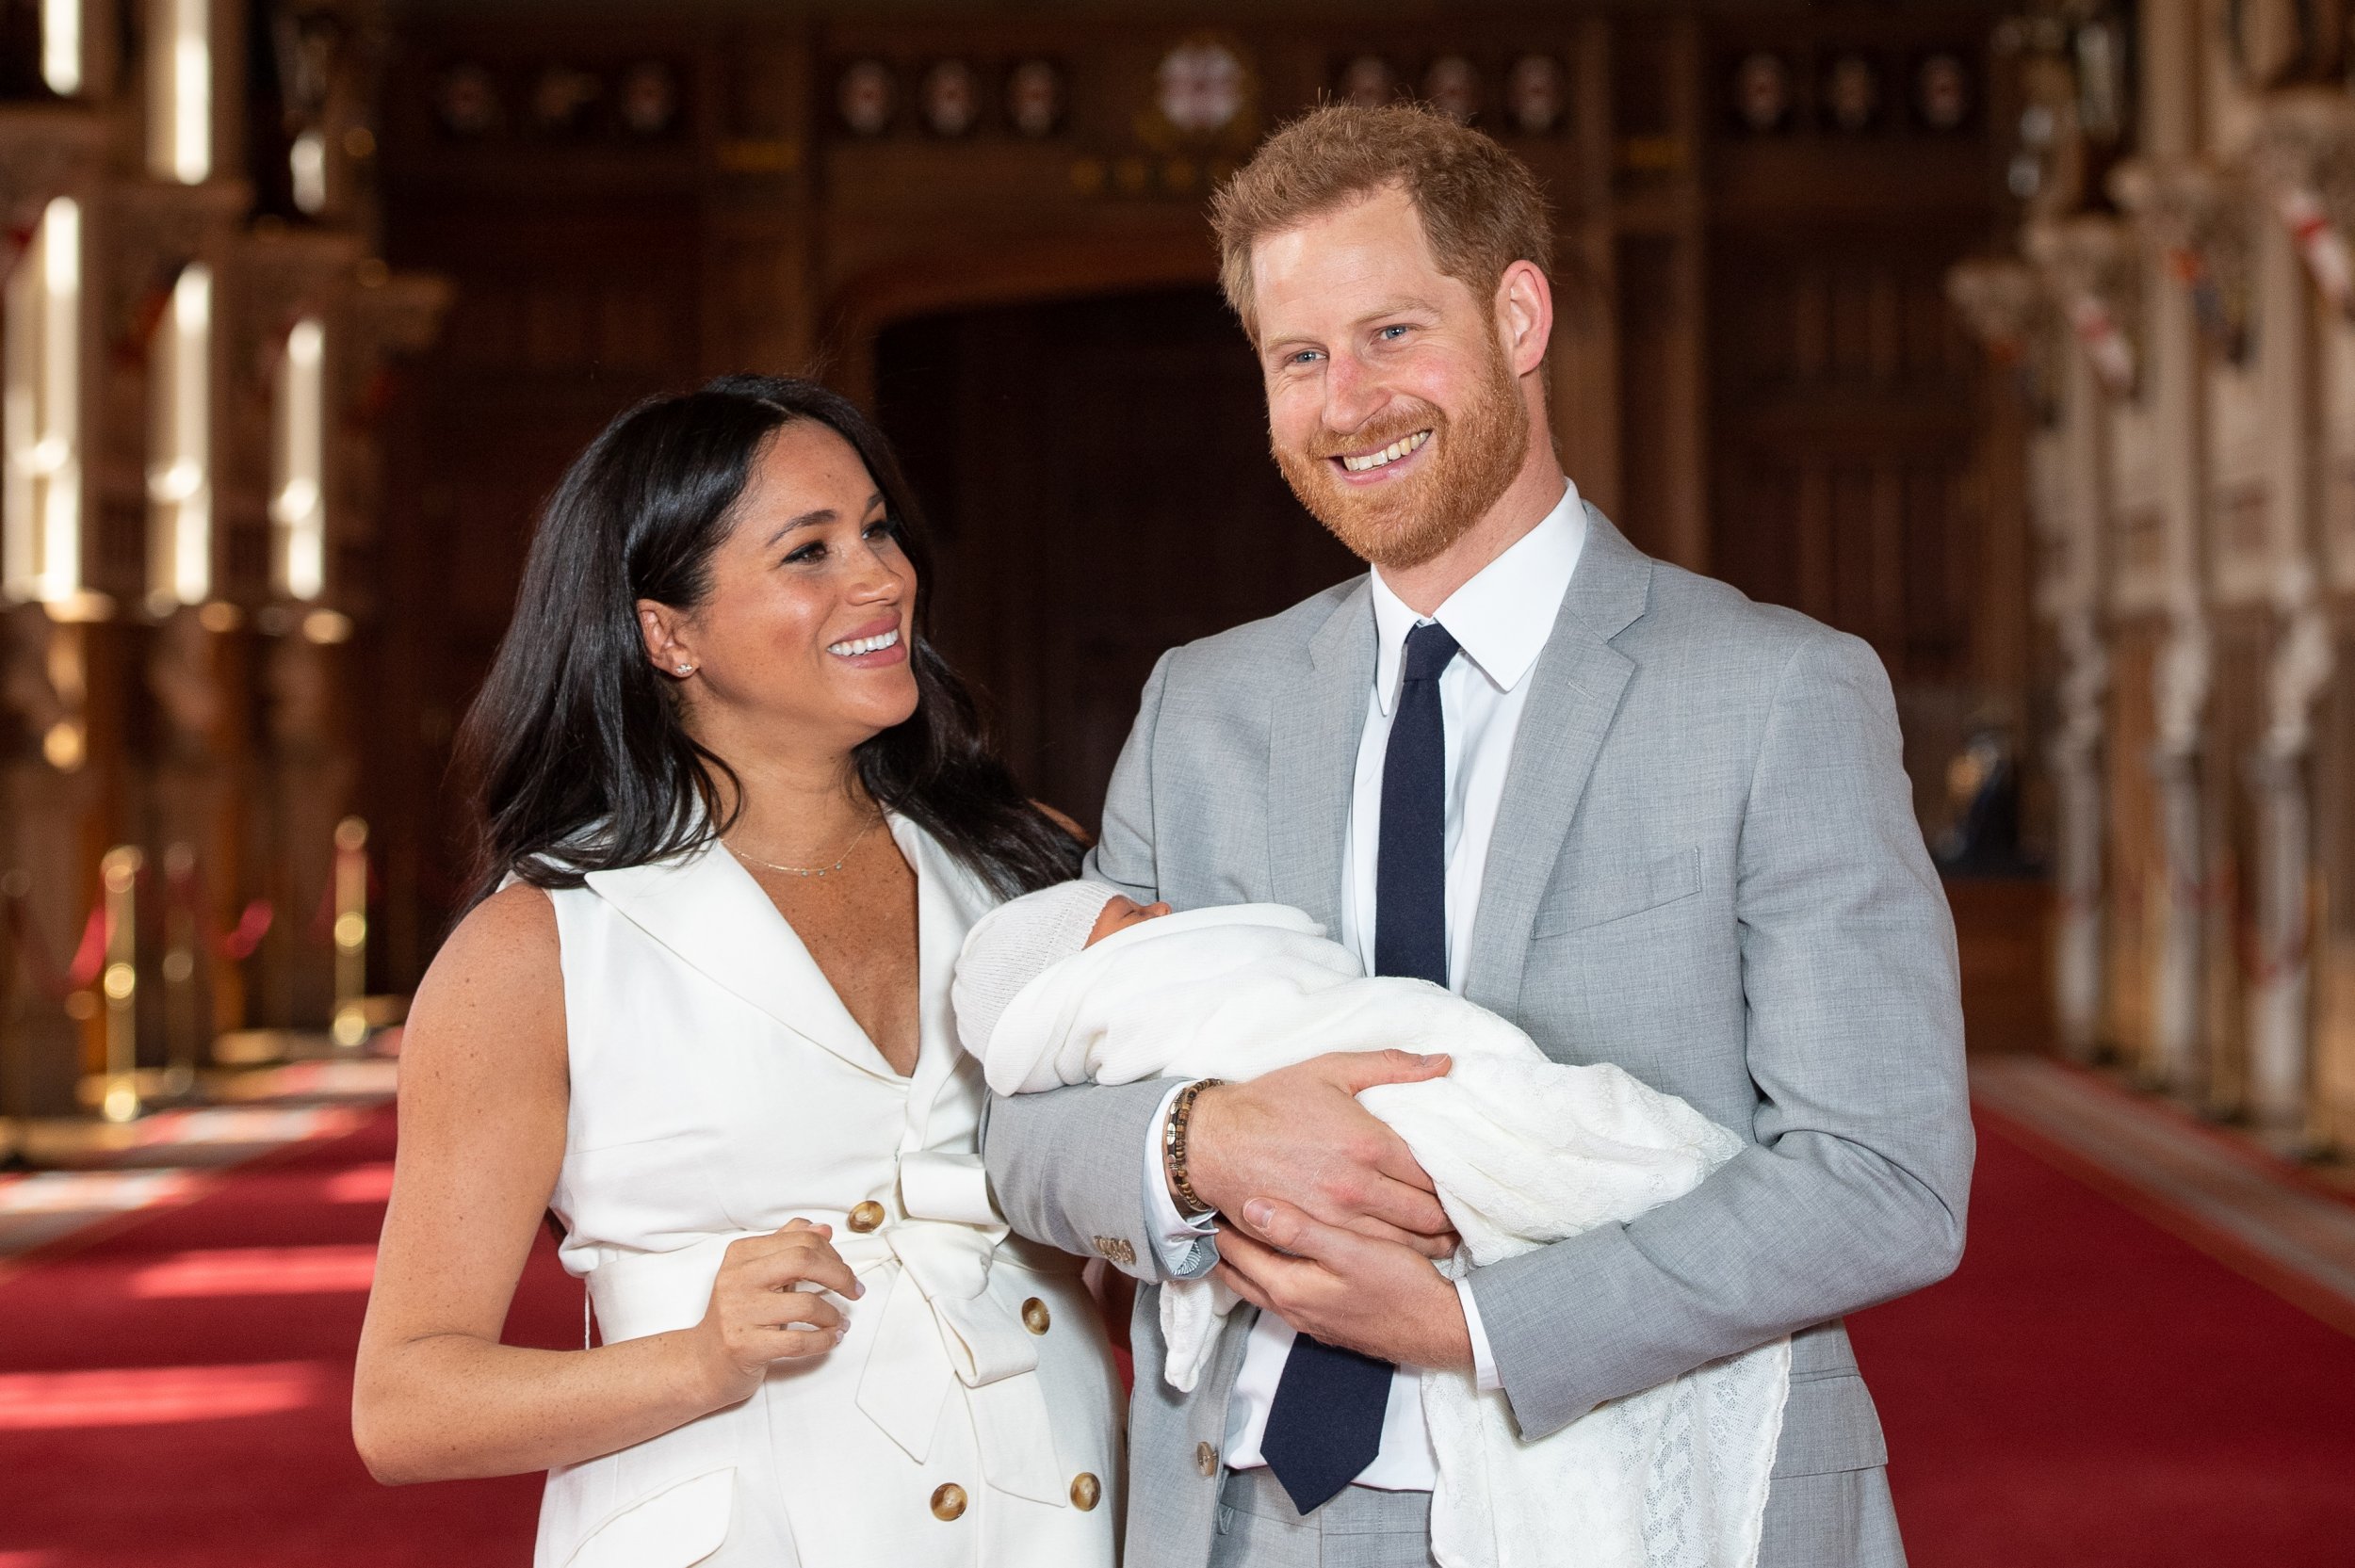 Why Isn T Baby Sussex Archie A Prince Prince Harry And Meghan Markle S Son Isn T The Only Queen Elizabeth Ii Great Grandchild Without A Title